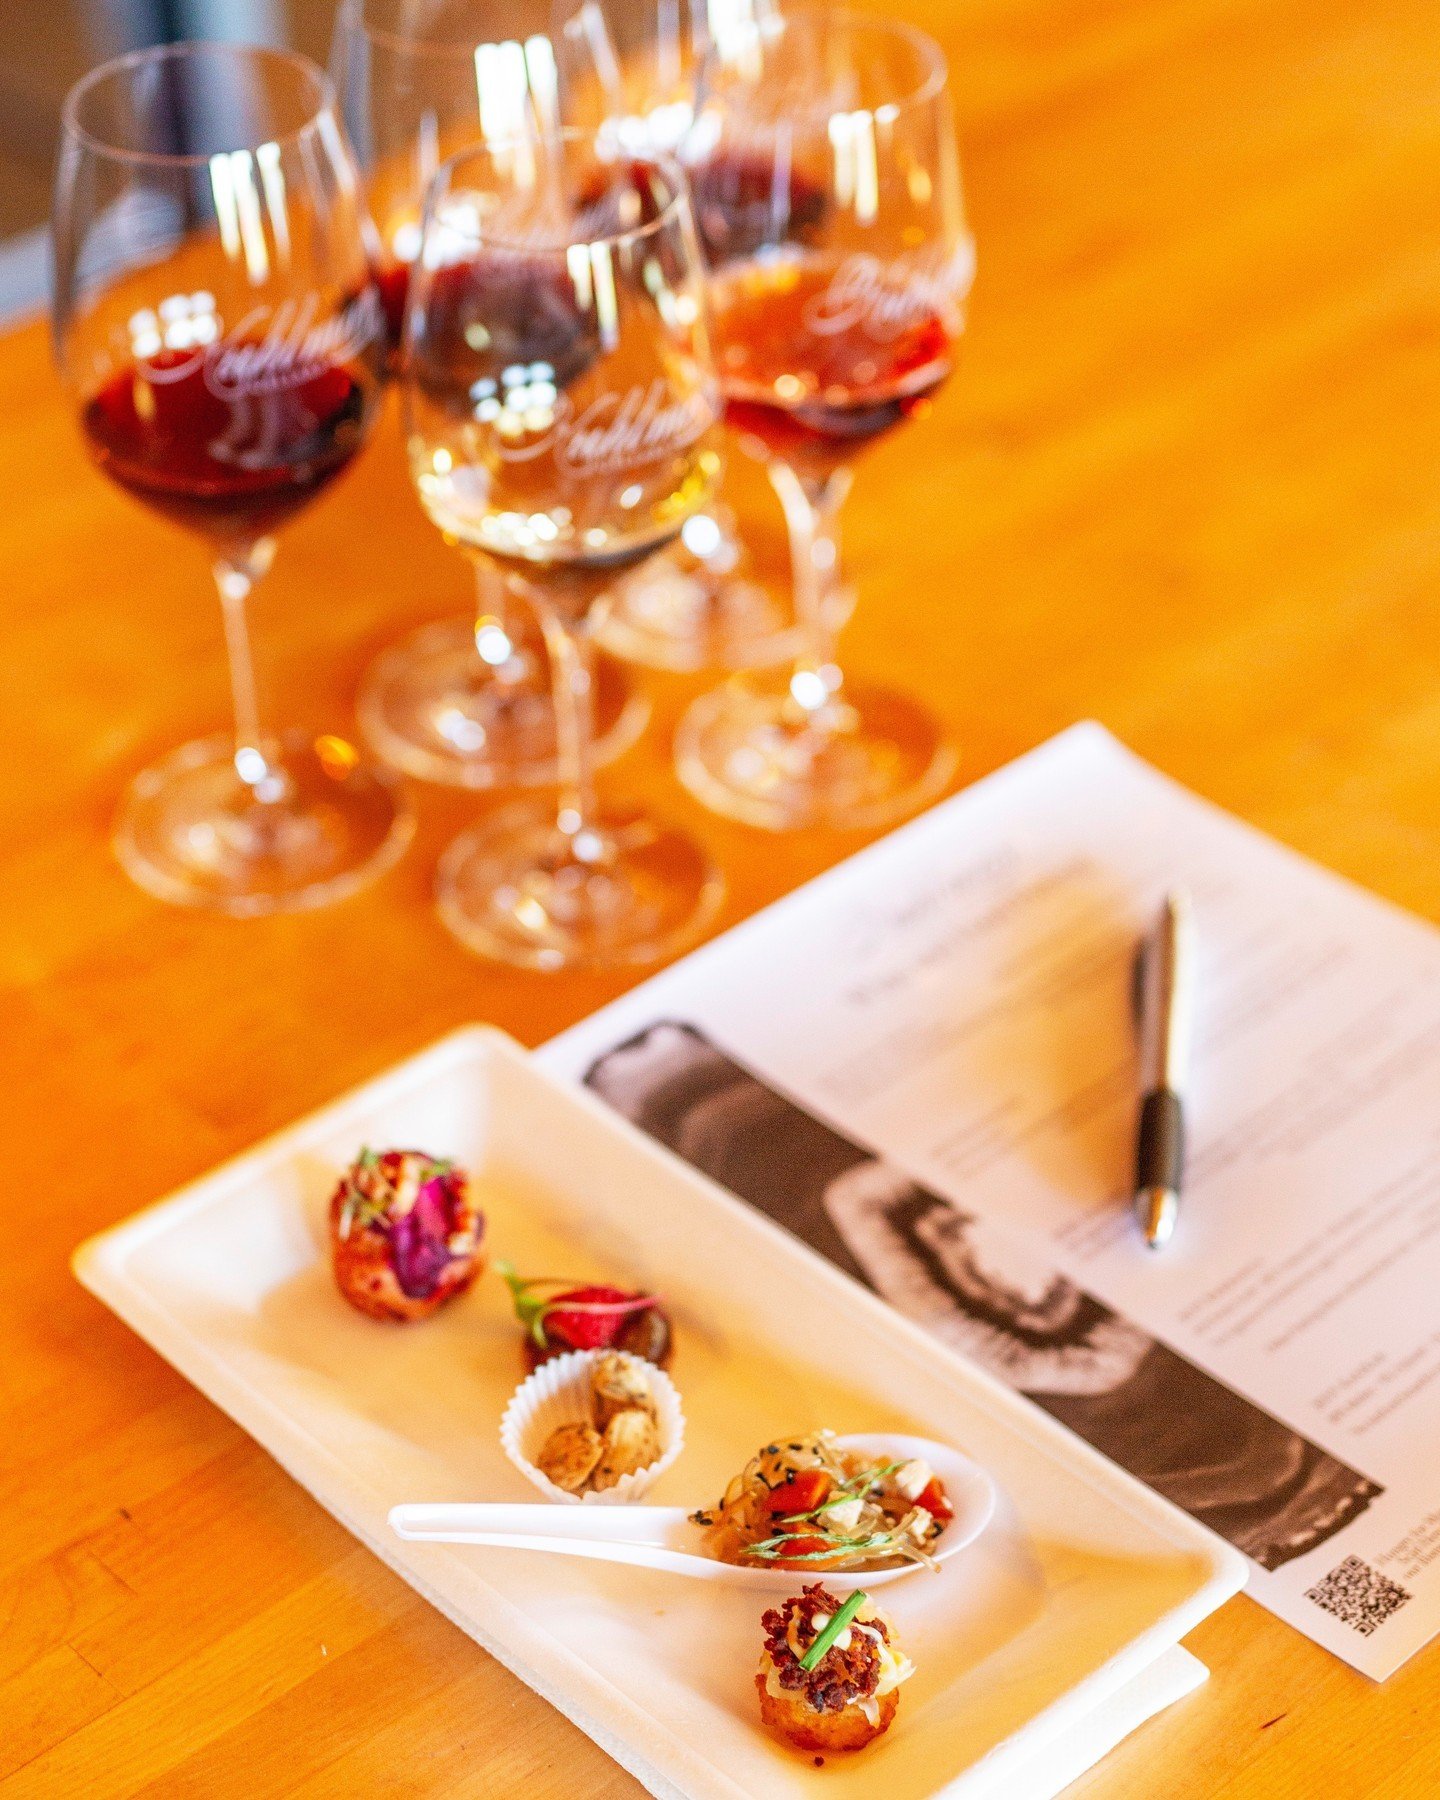 Have you tried our new spring Wine &amp; Food Experience menu yet? Come enjoy five of our wines expertly paired with chef-prepared bites. 

Spring 2024 Menu:
2022 CALCARIA - Loaded Tater Tot with Manchego and Spanish Chorizo
2022 HENSELL ROS&Eacute; 